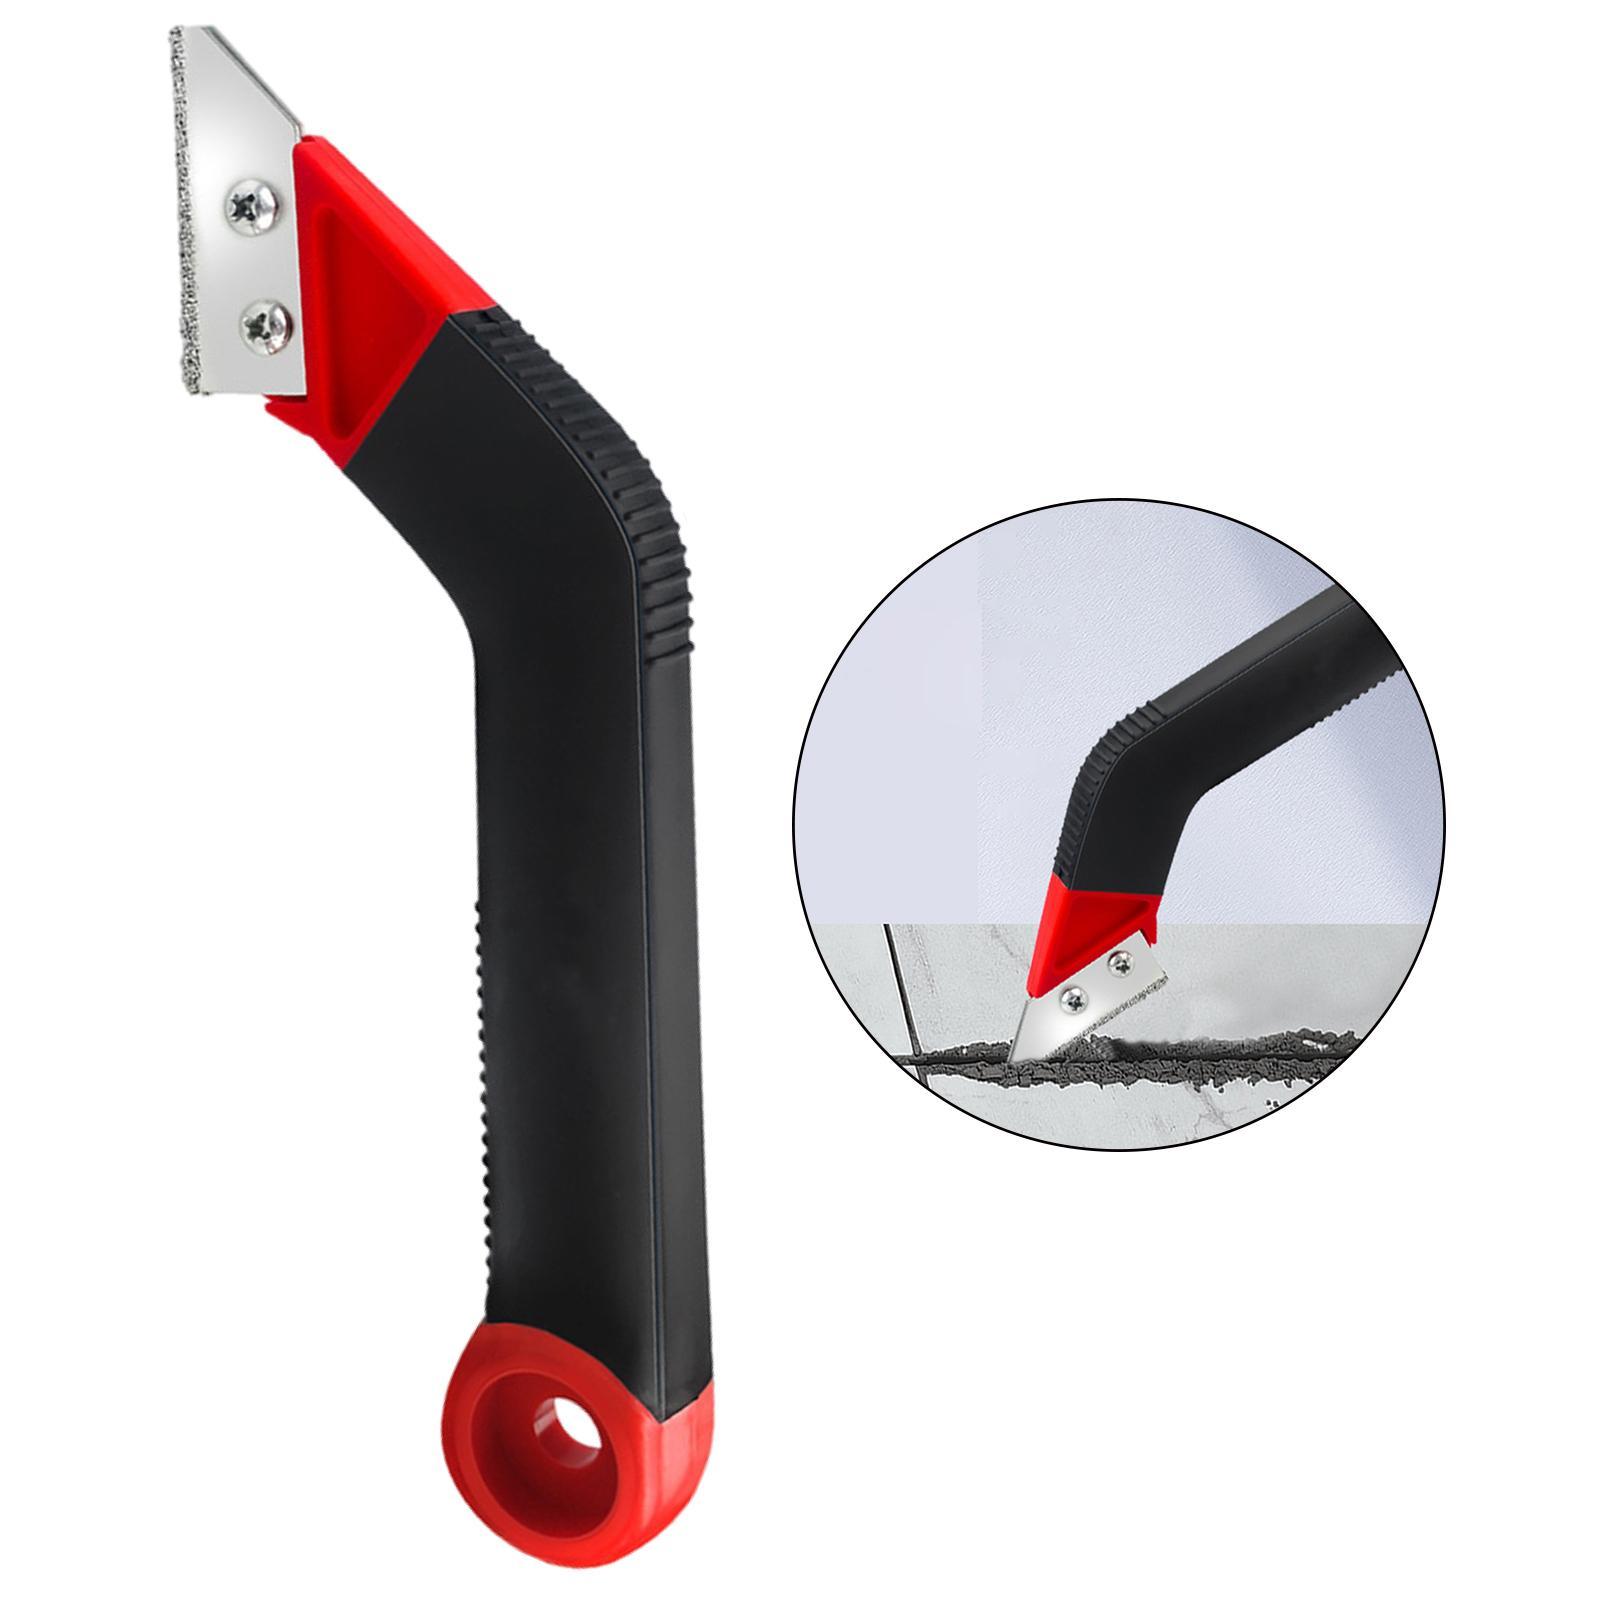 Remover Knife Blade Cleaner Scraper Scraping Tool for Floor Seam Window Wall